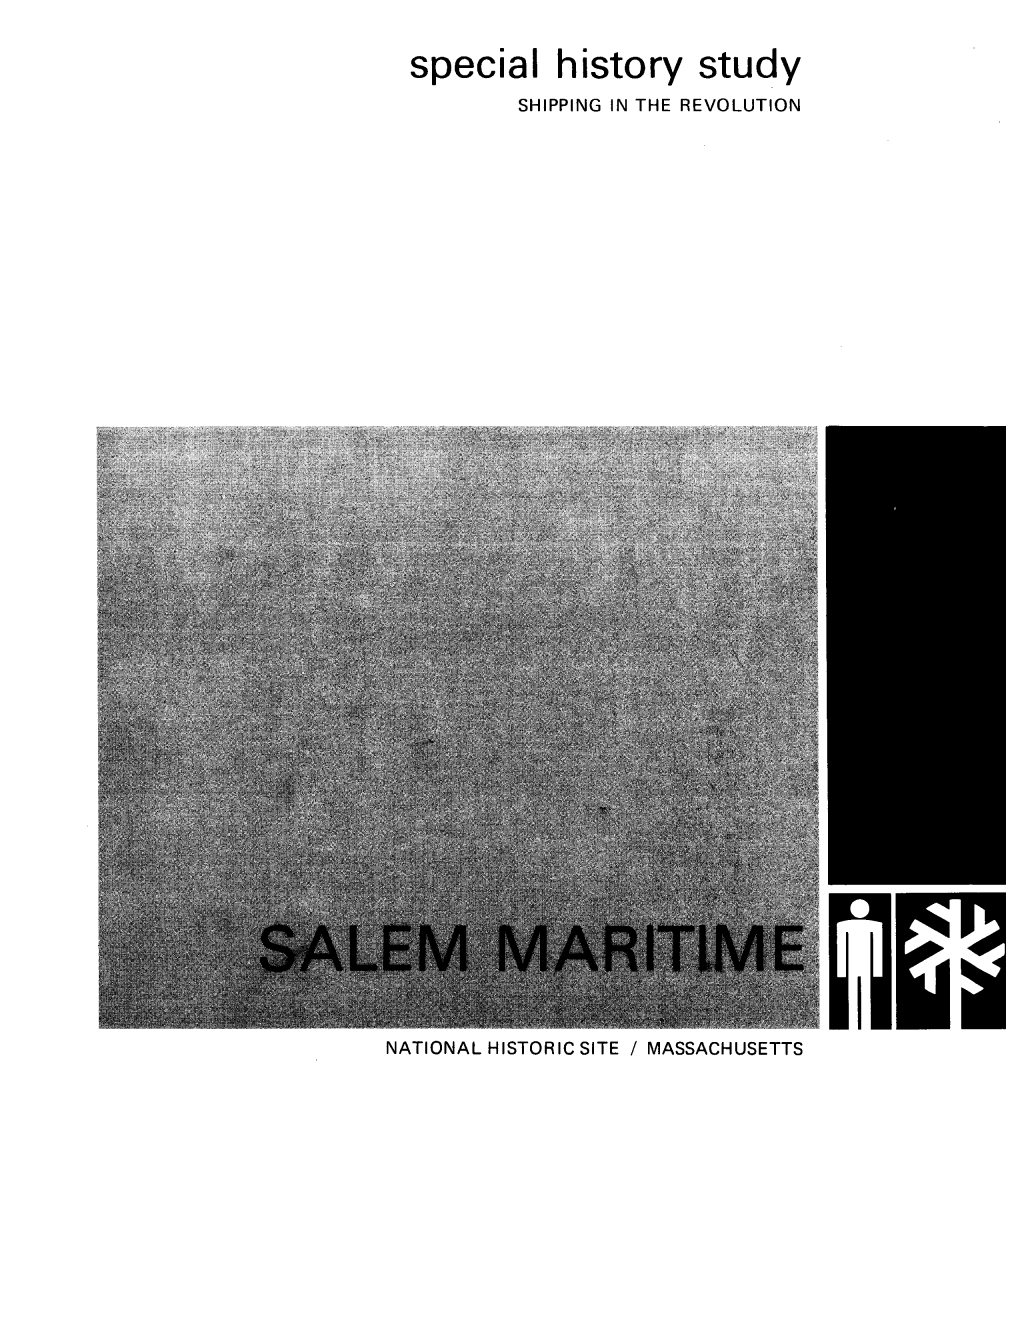 Special History Study: Shipping in the Revolution, Salem